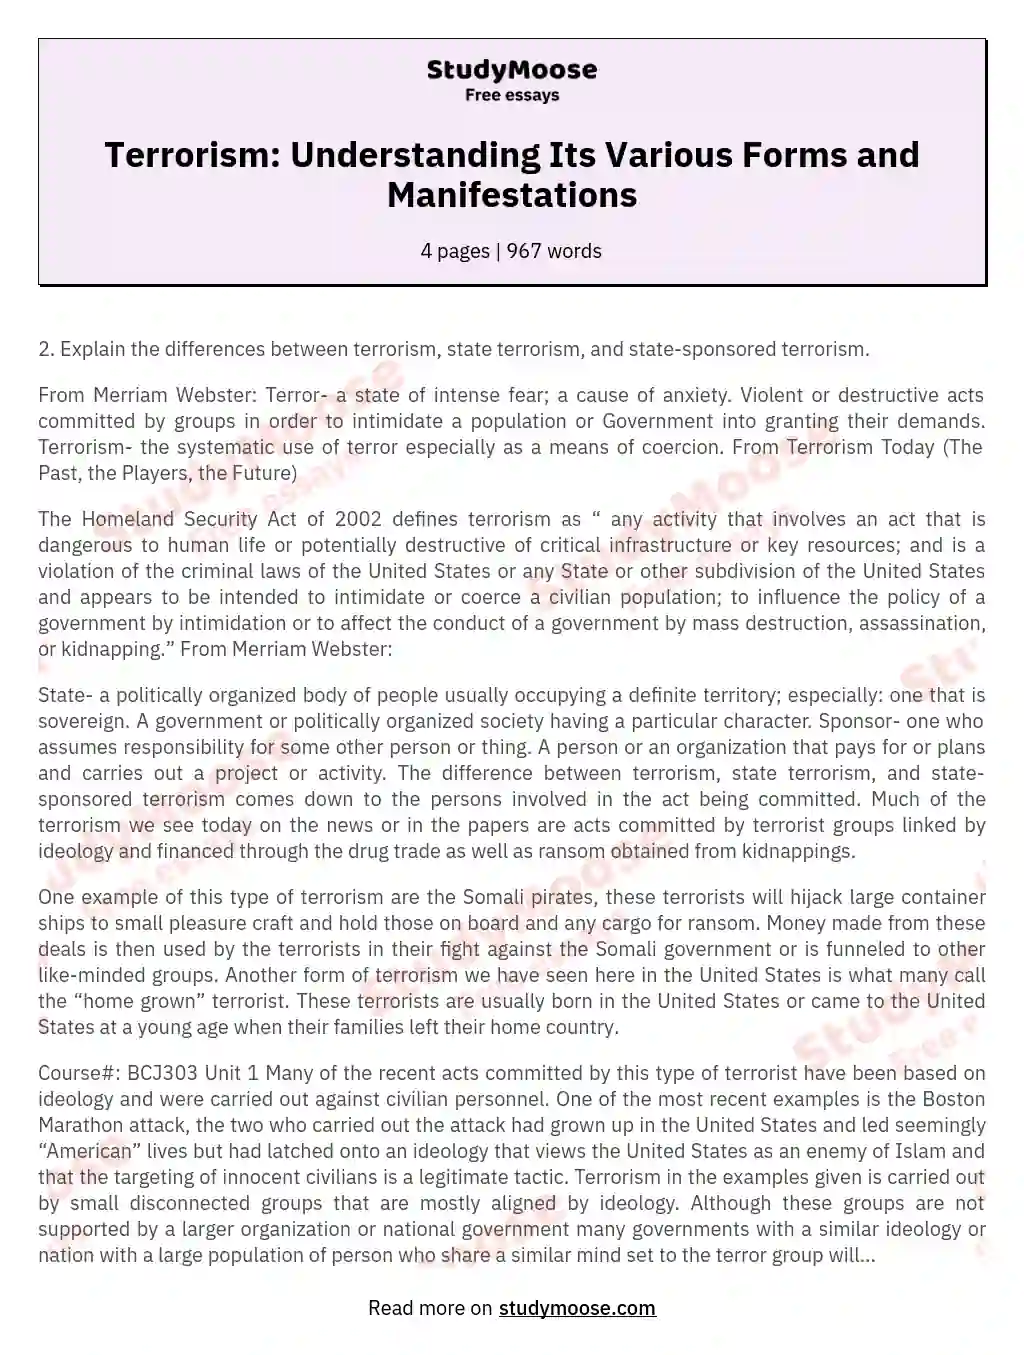 Terrorism: Understanding Its Various Forms and Manifestations essay